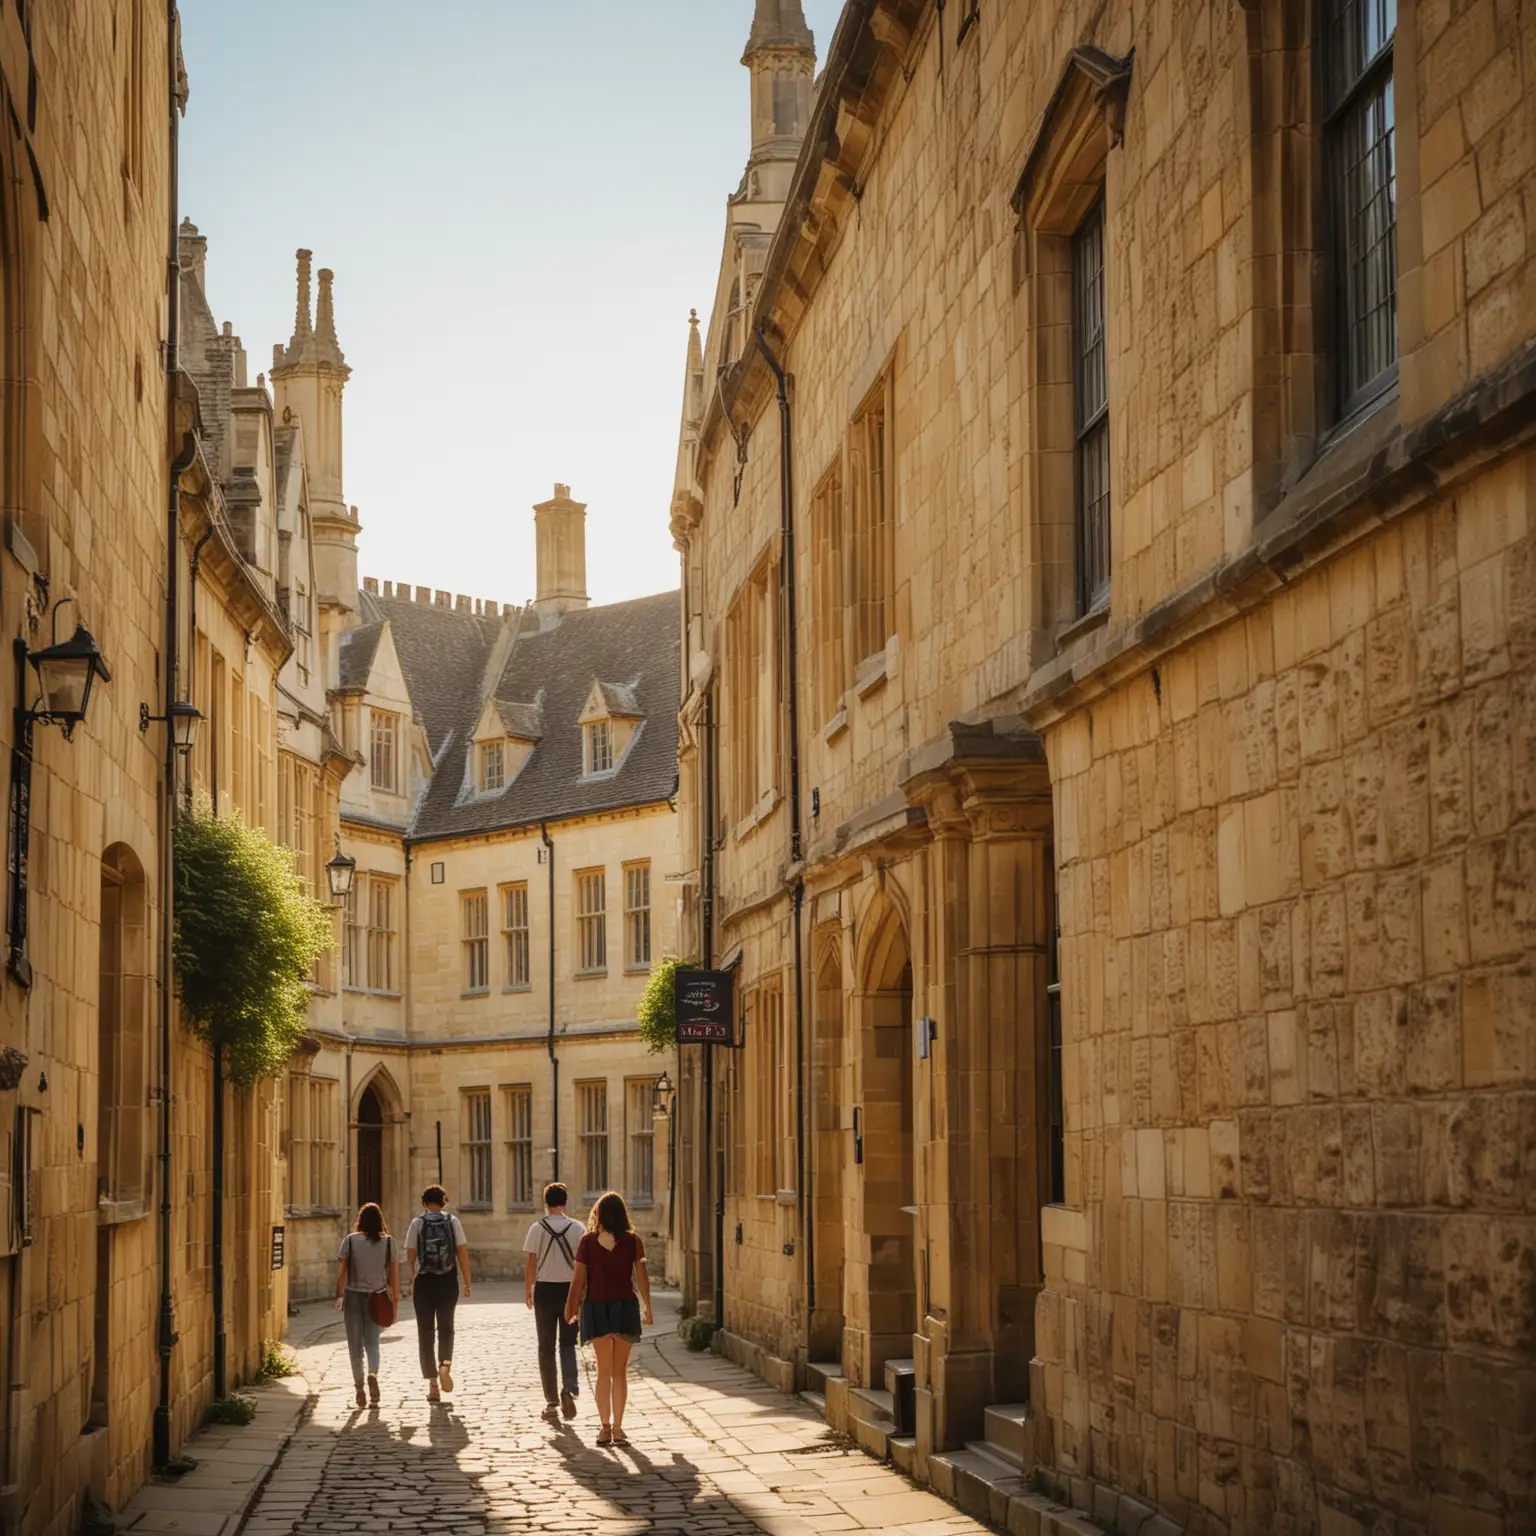 stunning photo from THE uk AS A Study abroad destination, a peaceful morning at Oxford with students walking and ancient stone buildings bathed in soft sunlight, Photography